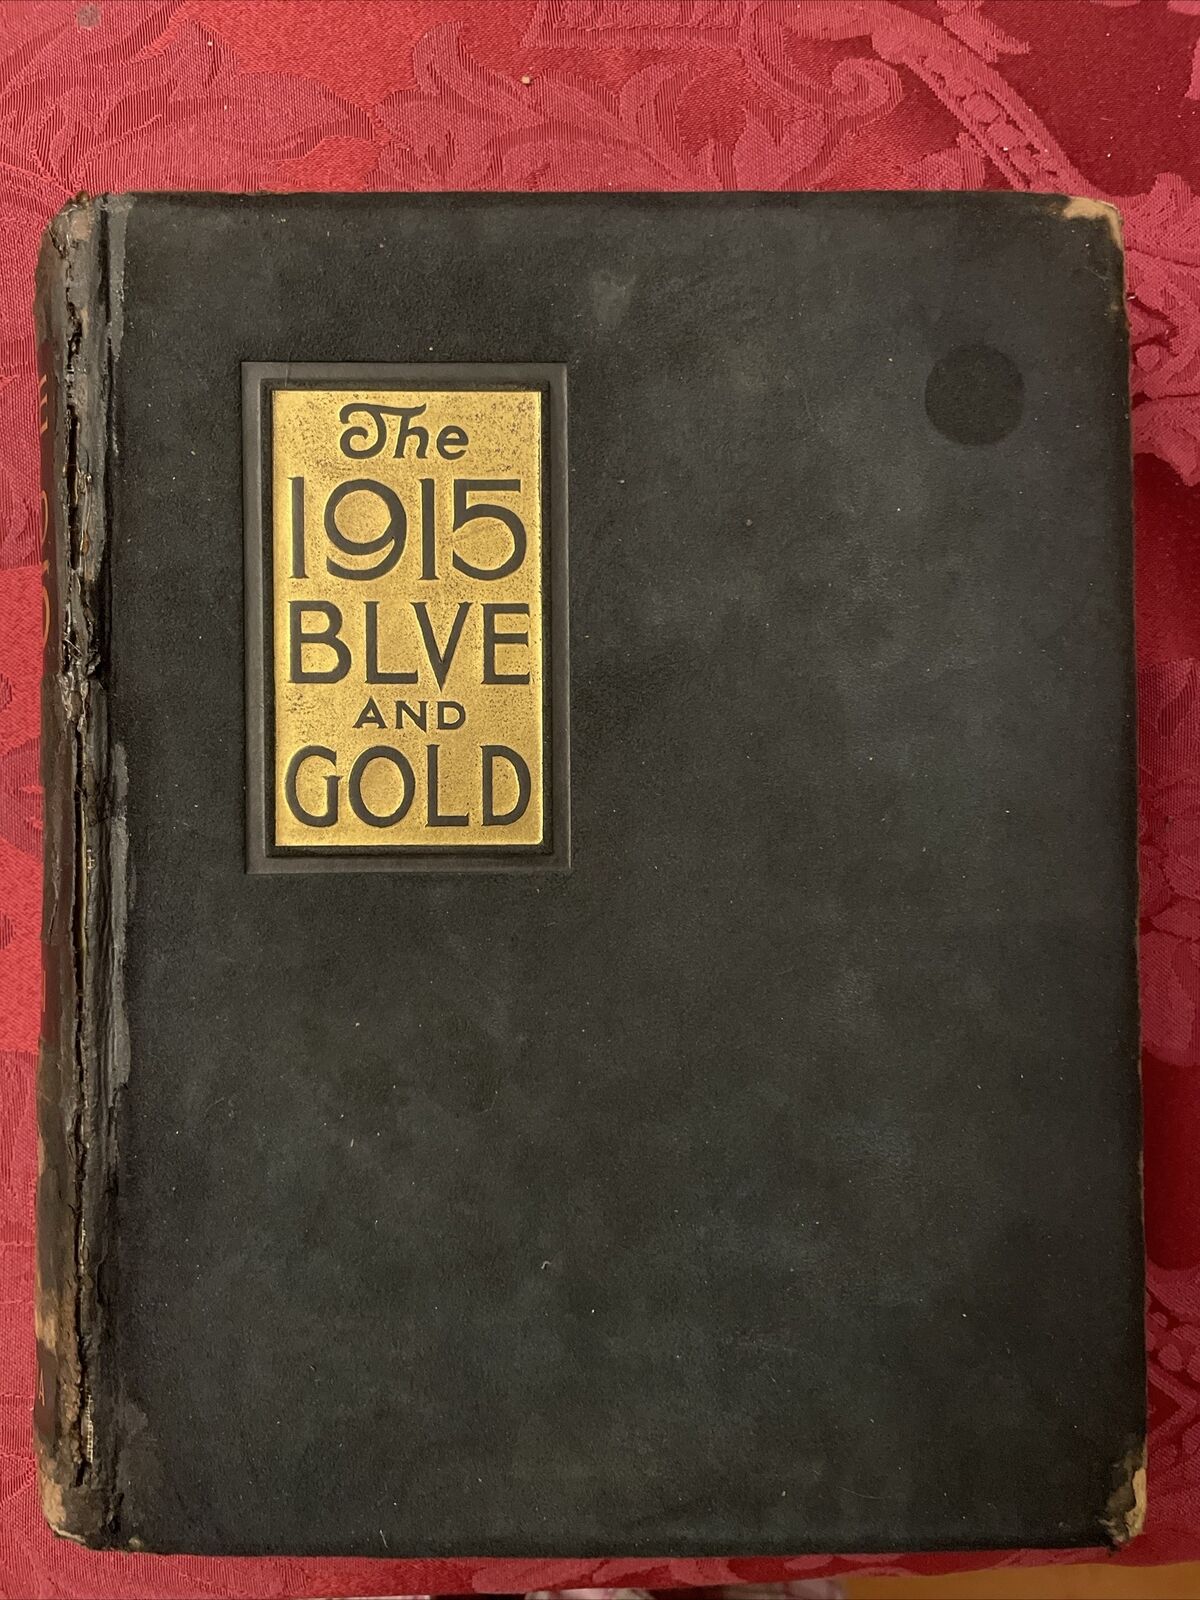 THE UNIVERSITY OF CALIFORNIA YEARBOOK BLUE AND GOLD 1915 VOLUME 41 Berkeley